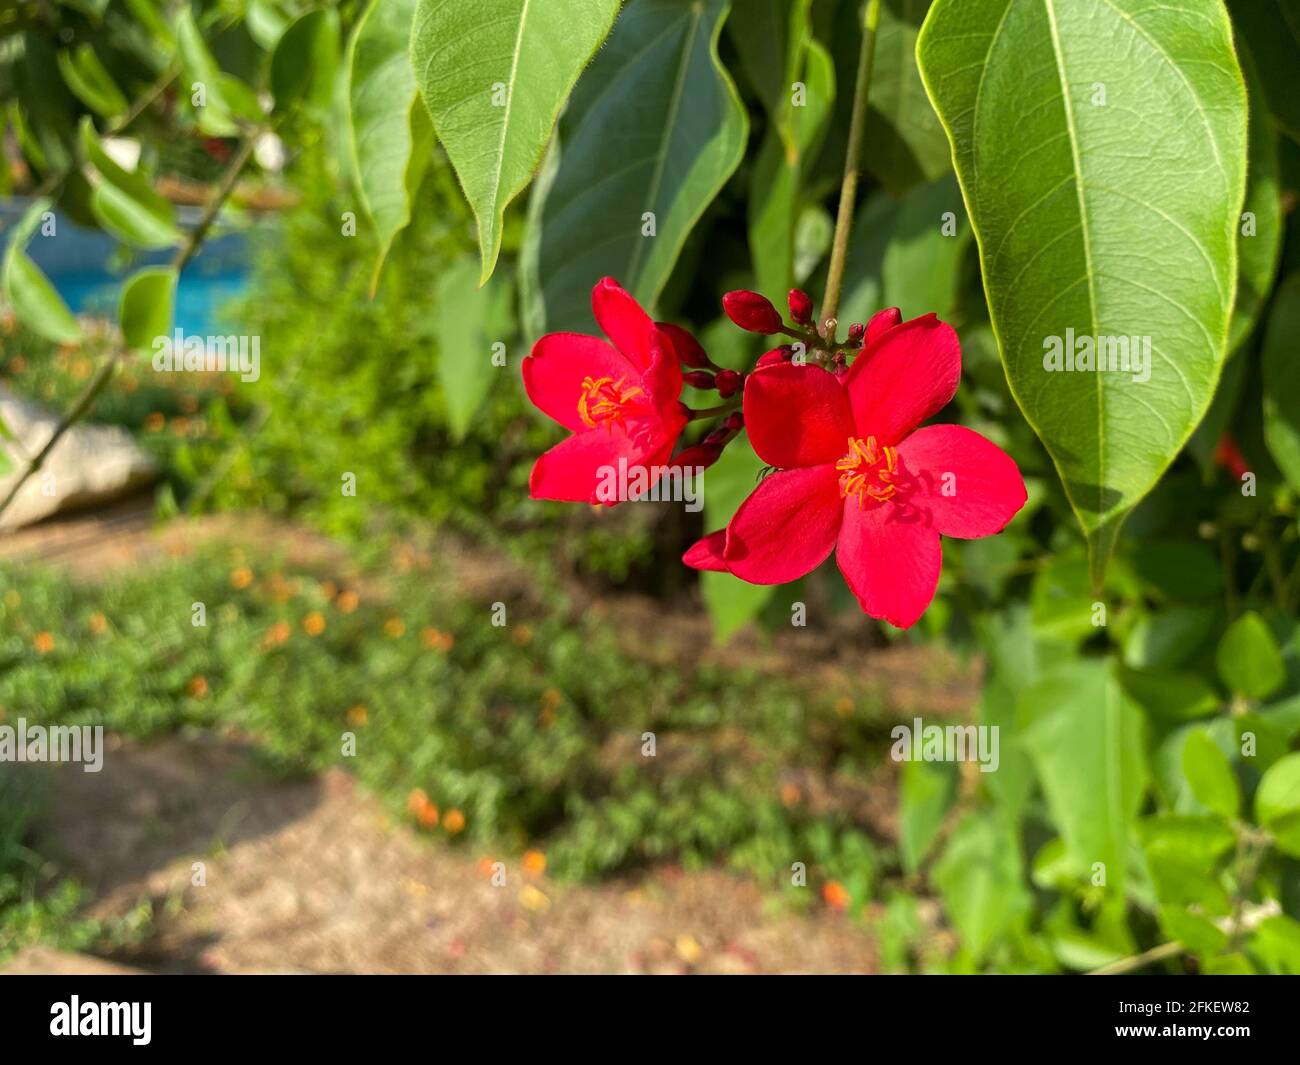 Pair of Jatropha integerrima, commonly known as peregrina or spicy jatropha a vibrant red flower showing off pollen in the sunshine. Stock Photo